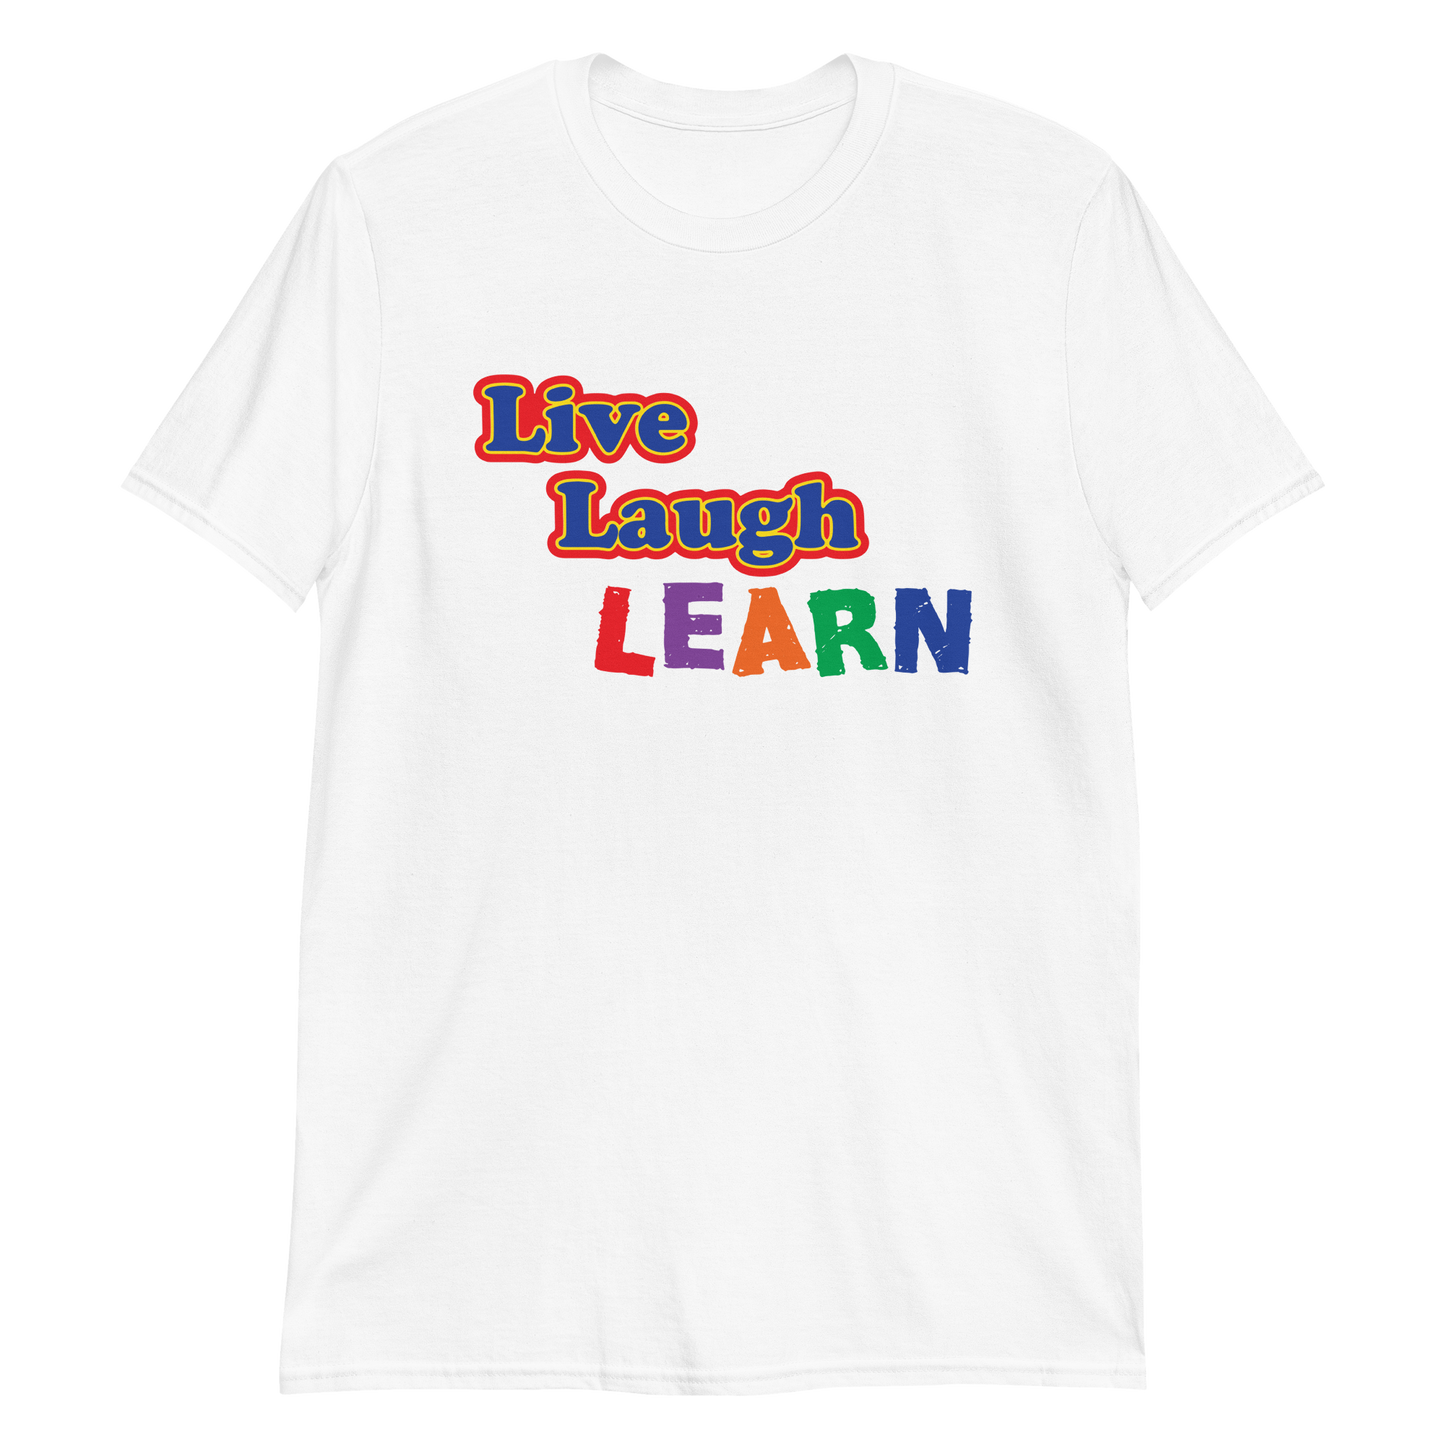 Live, Laugh, Learn.